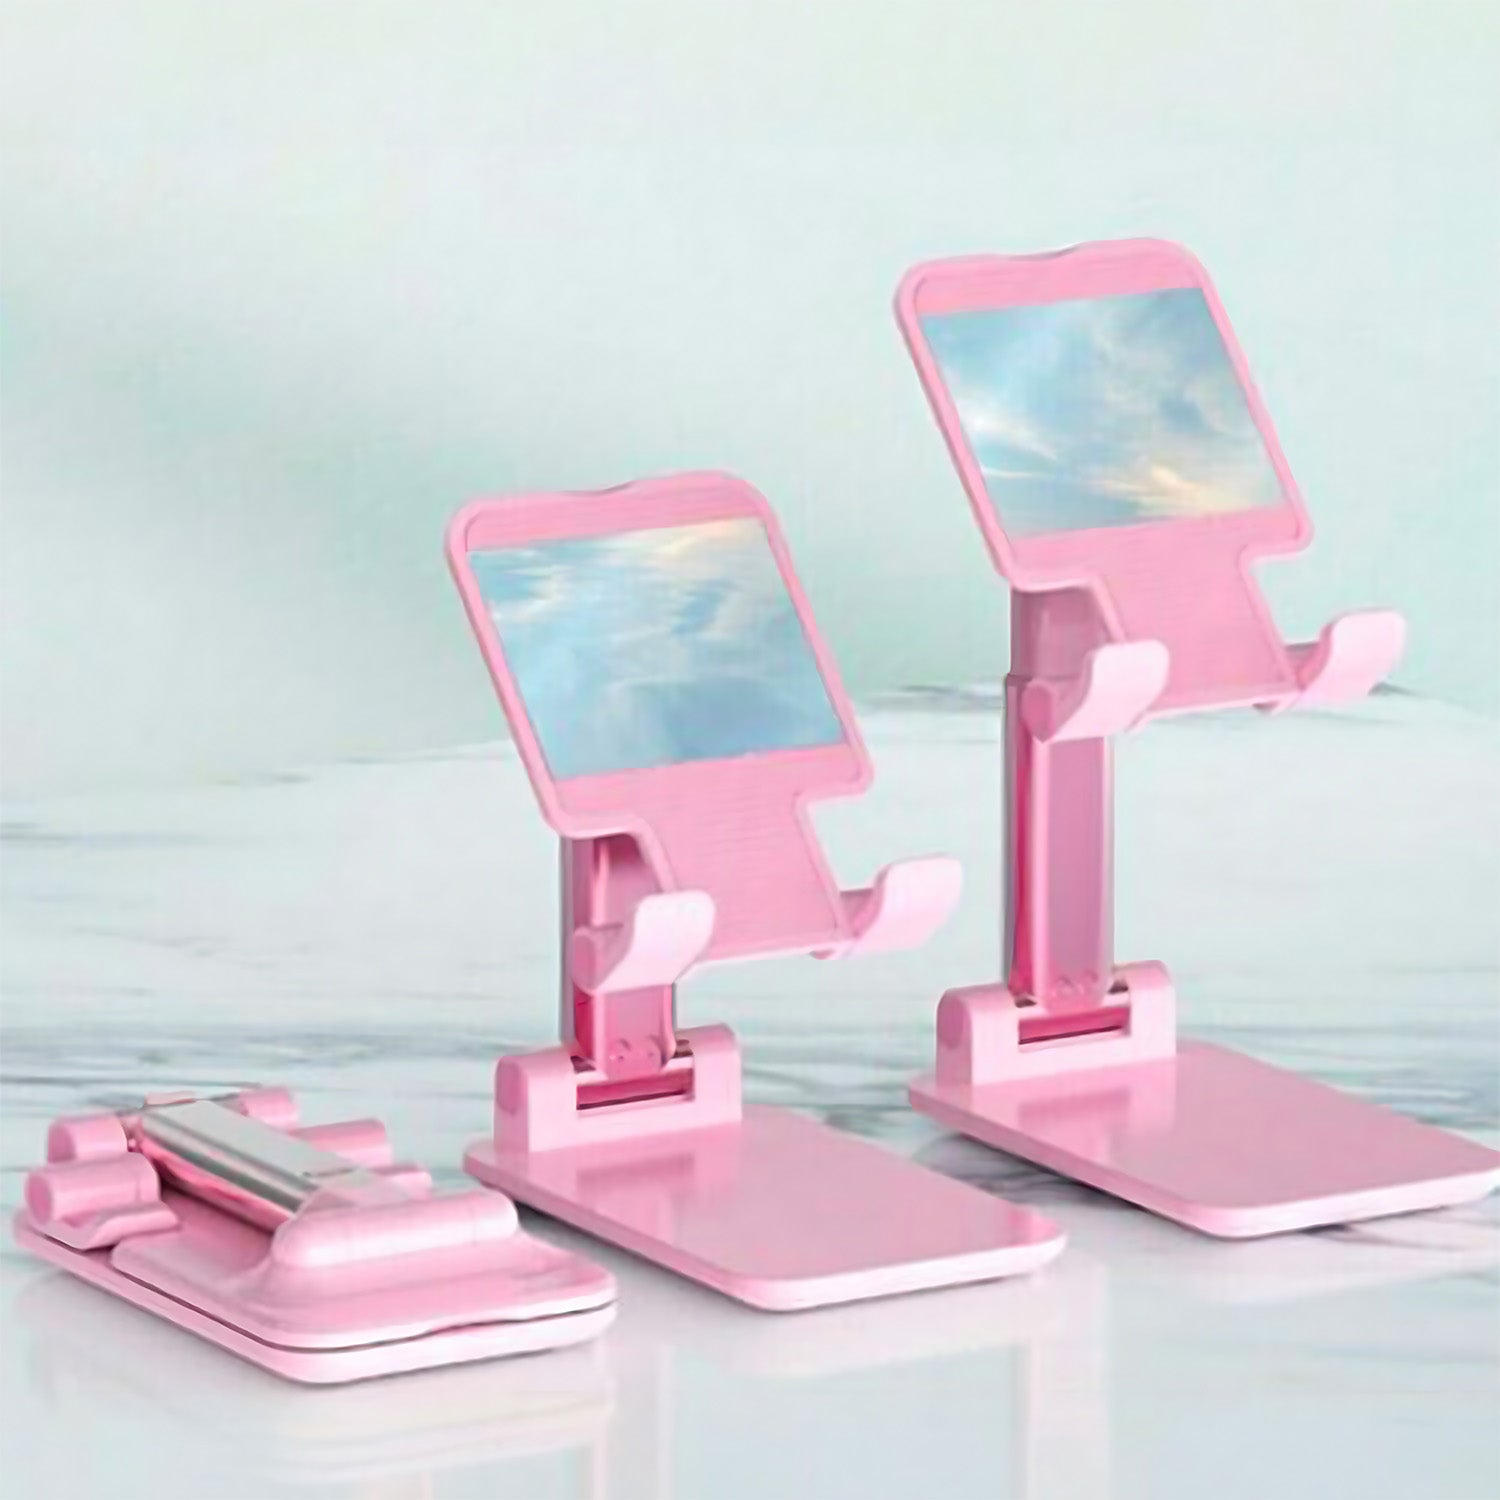 6636A DESKTOP CELL PHONE STAND PHONE HOLDER WITH MIRROR FULL 3-WAY ADJUSTABLE PHONE STAND FOR DESK HEIGHT + ANGLES PERFECT AS DESK ORGANIZERS AND ACCESSORIES